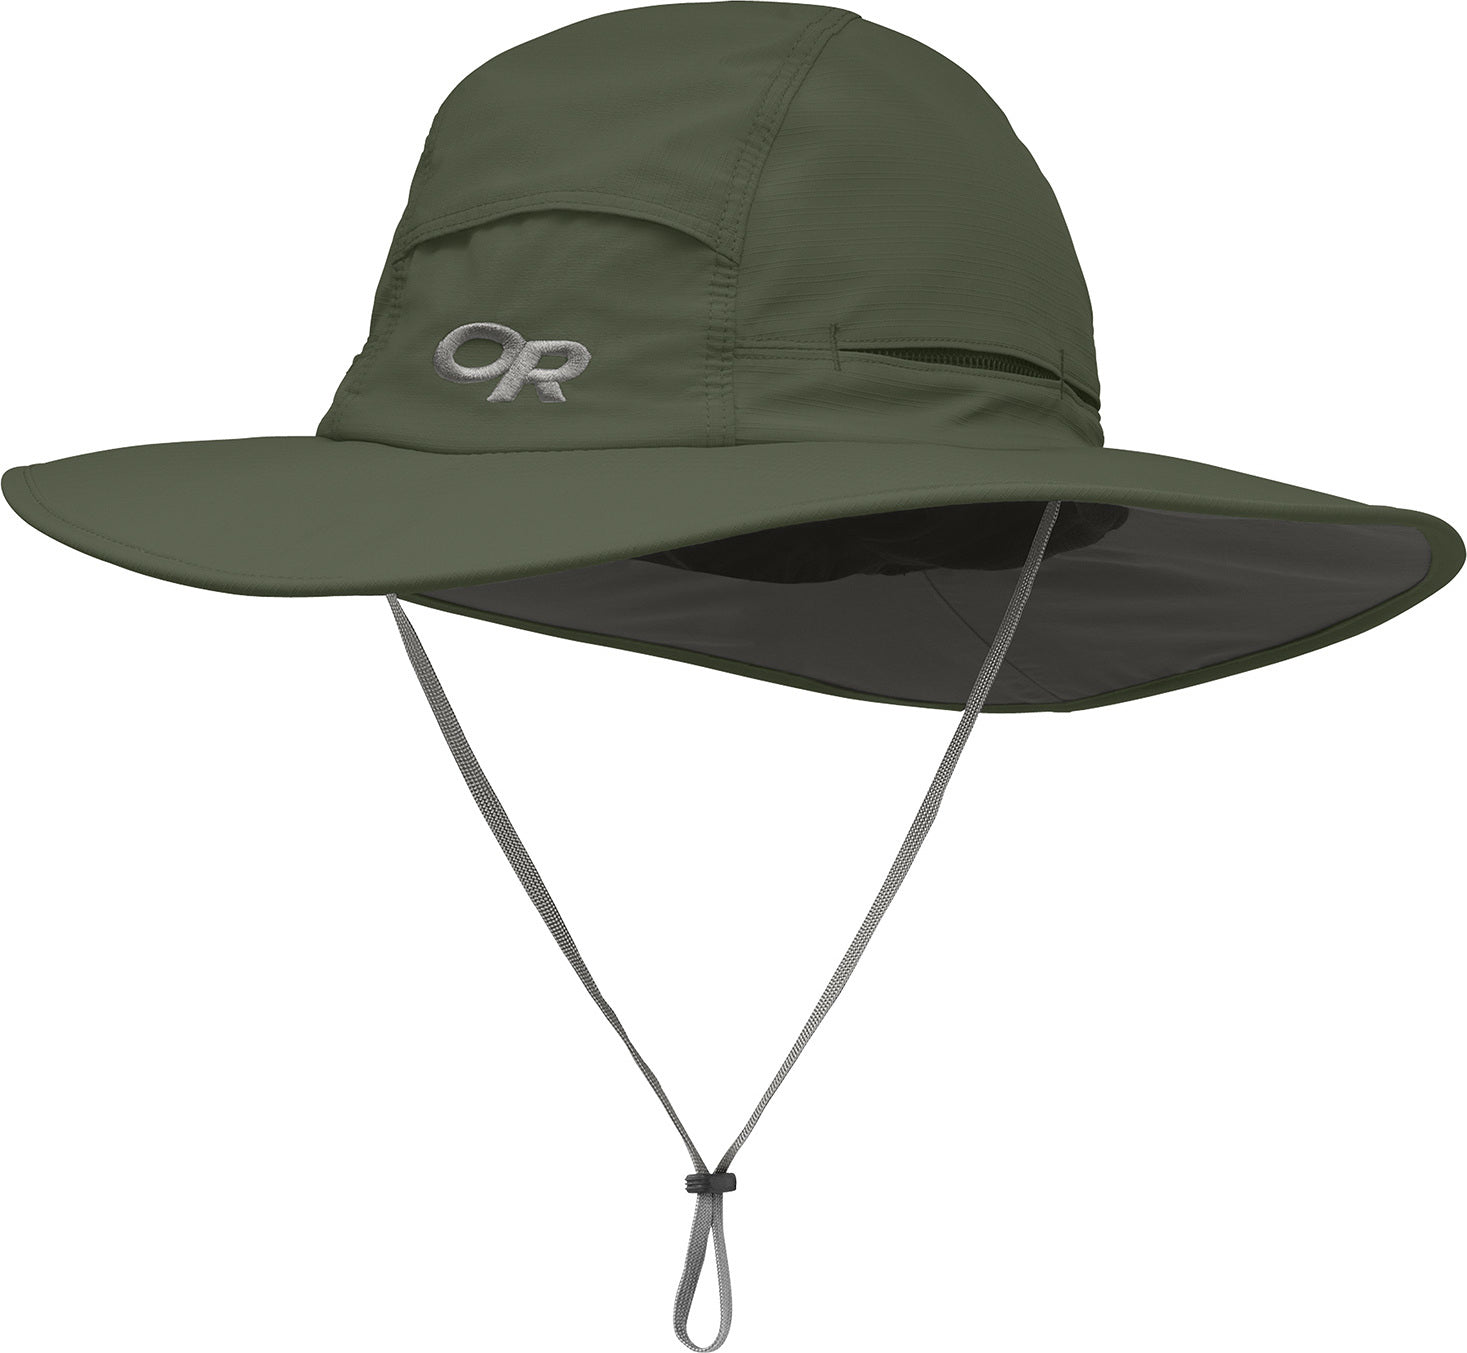 Outdoor Research Sombriolet Sun Hat - Unisex | Altitude Sports